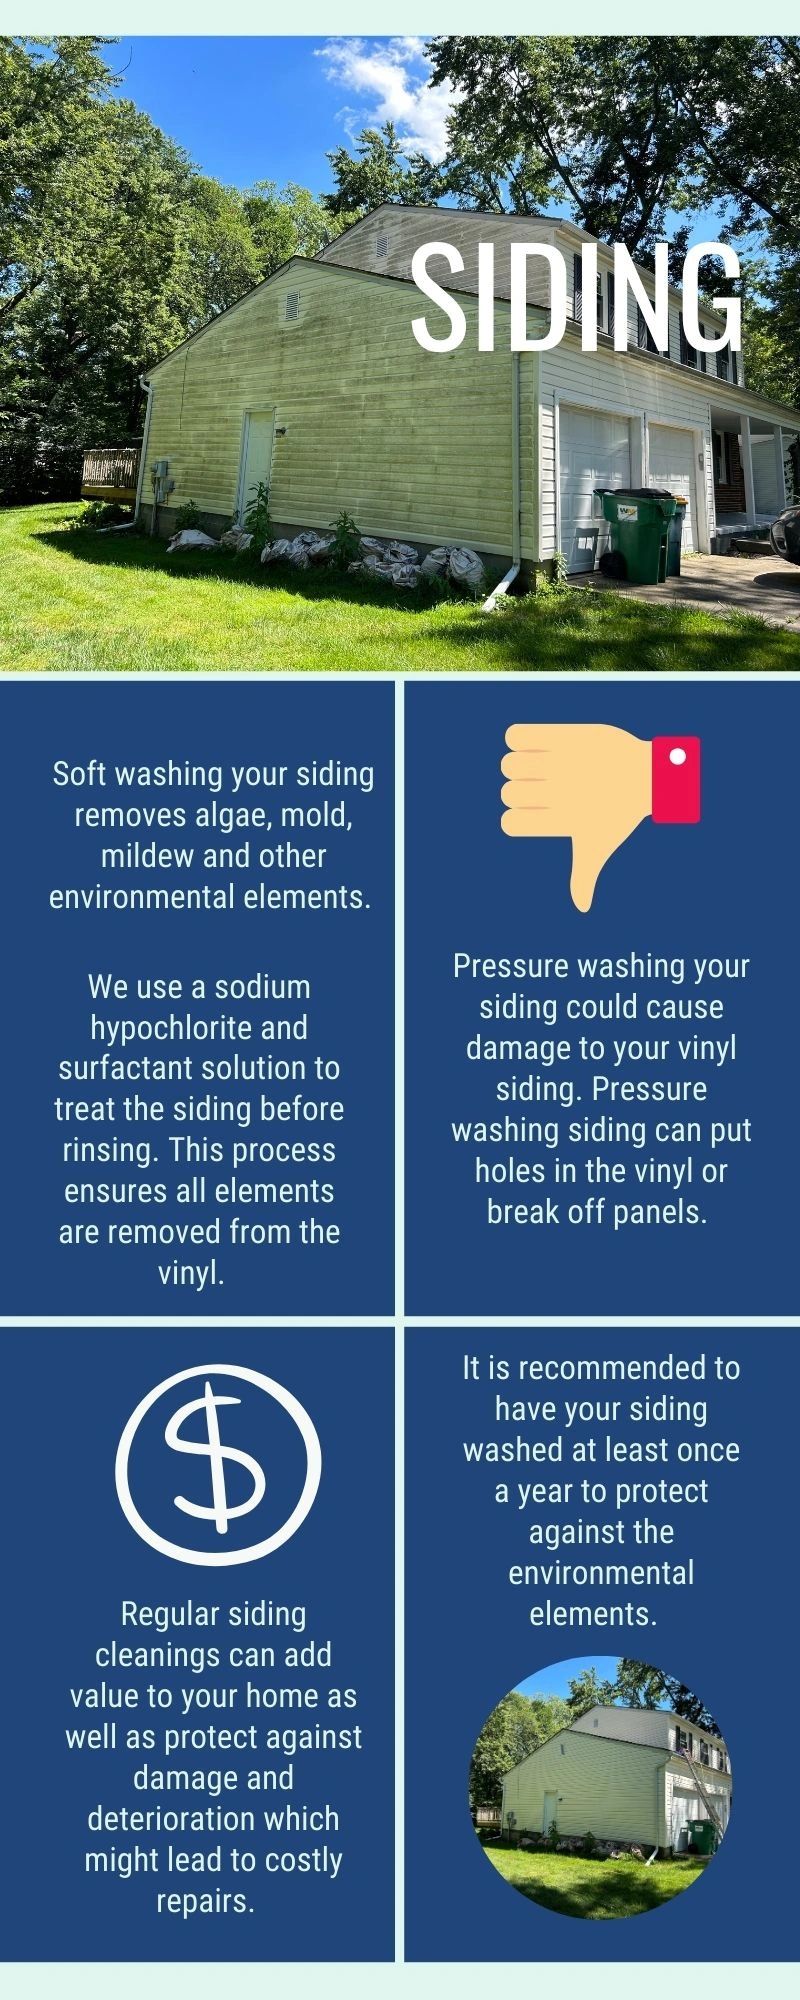 How to Protect Plants when Soft Washing